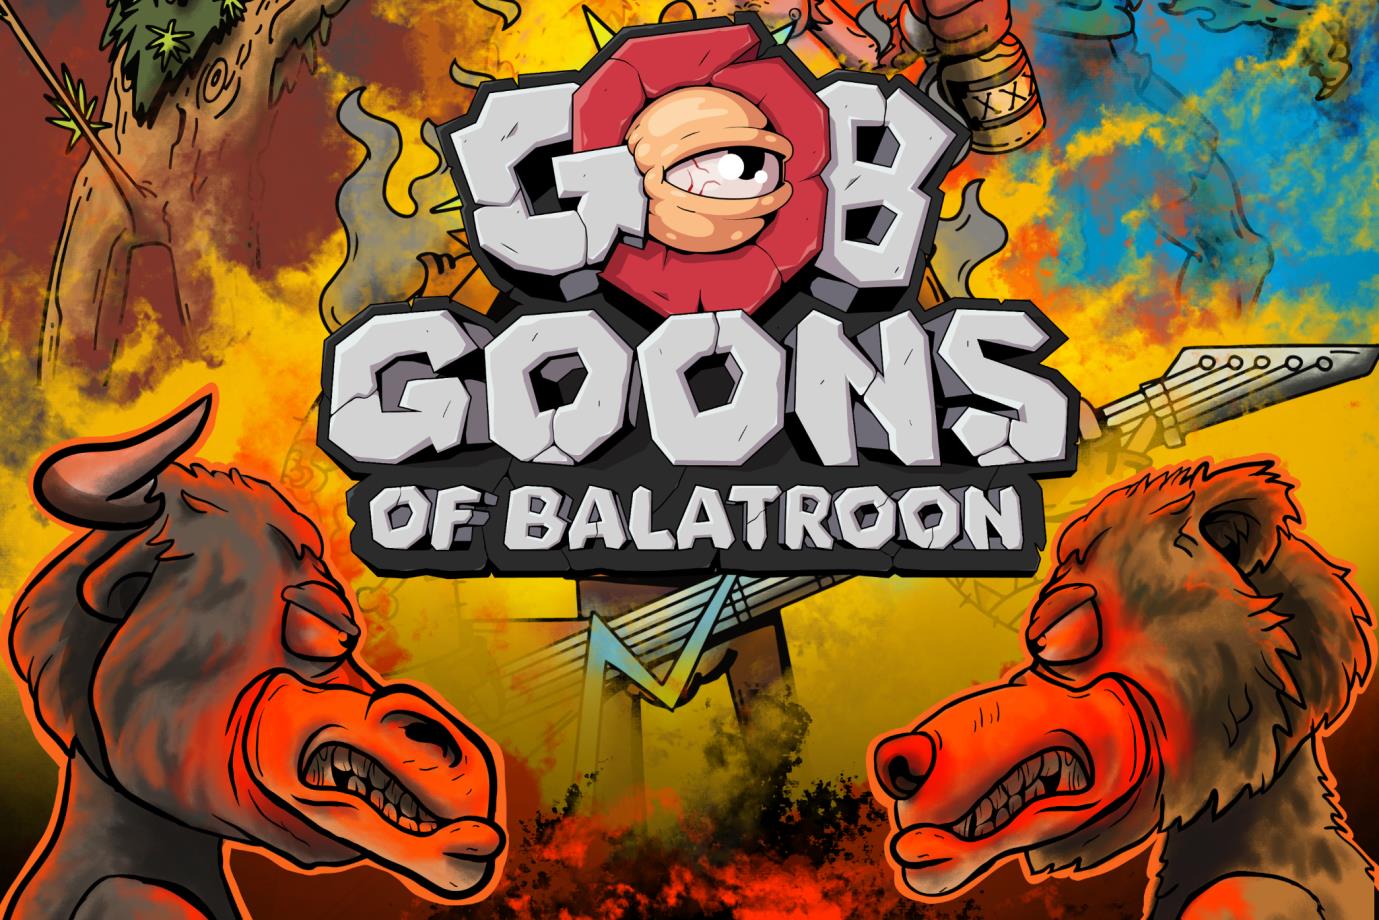 ‘Goons of Balatroon’ NFT Project Launches Genesis Goon Card Pack